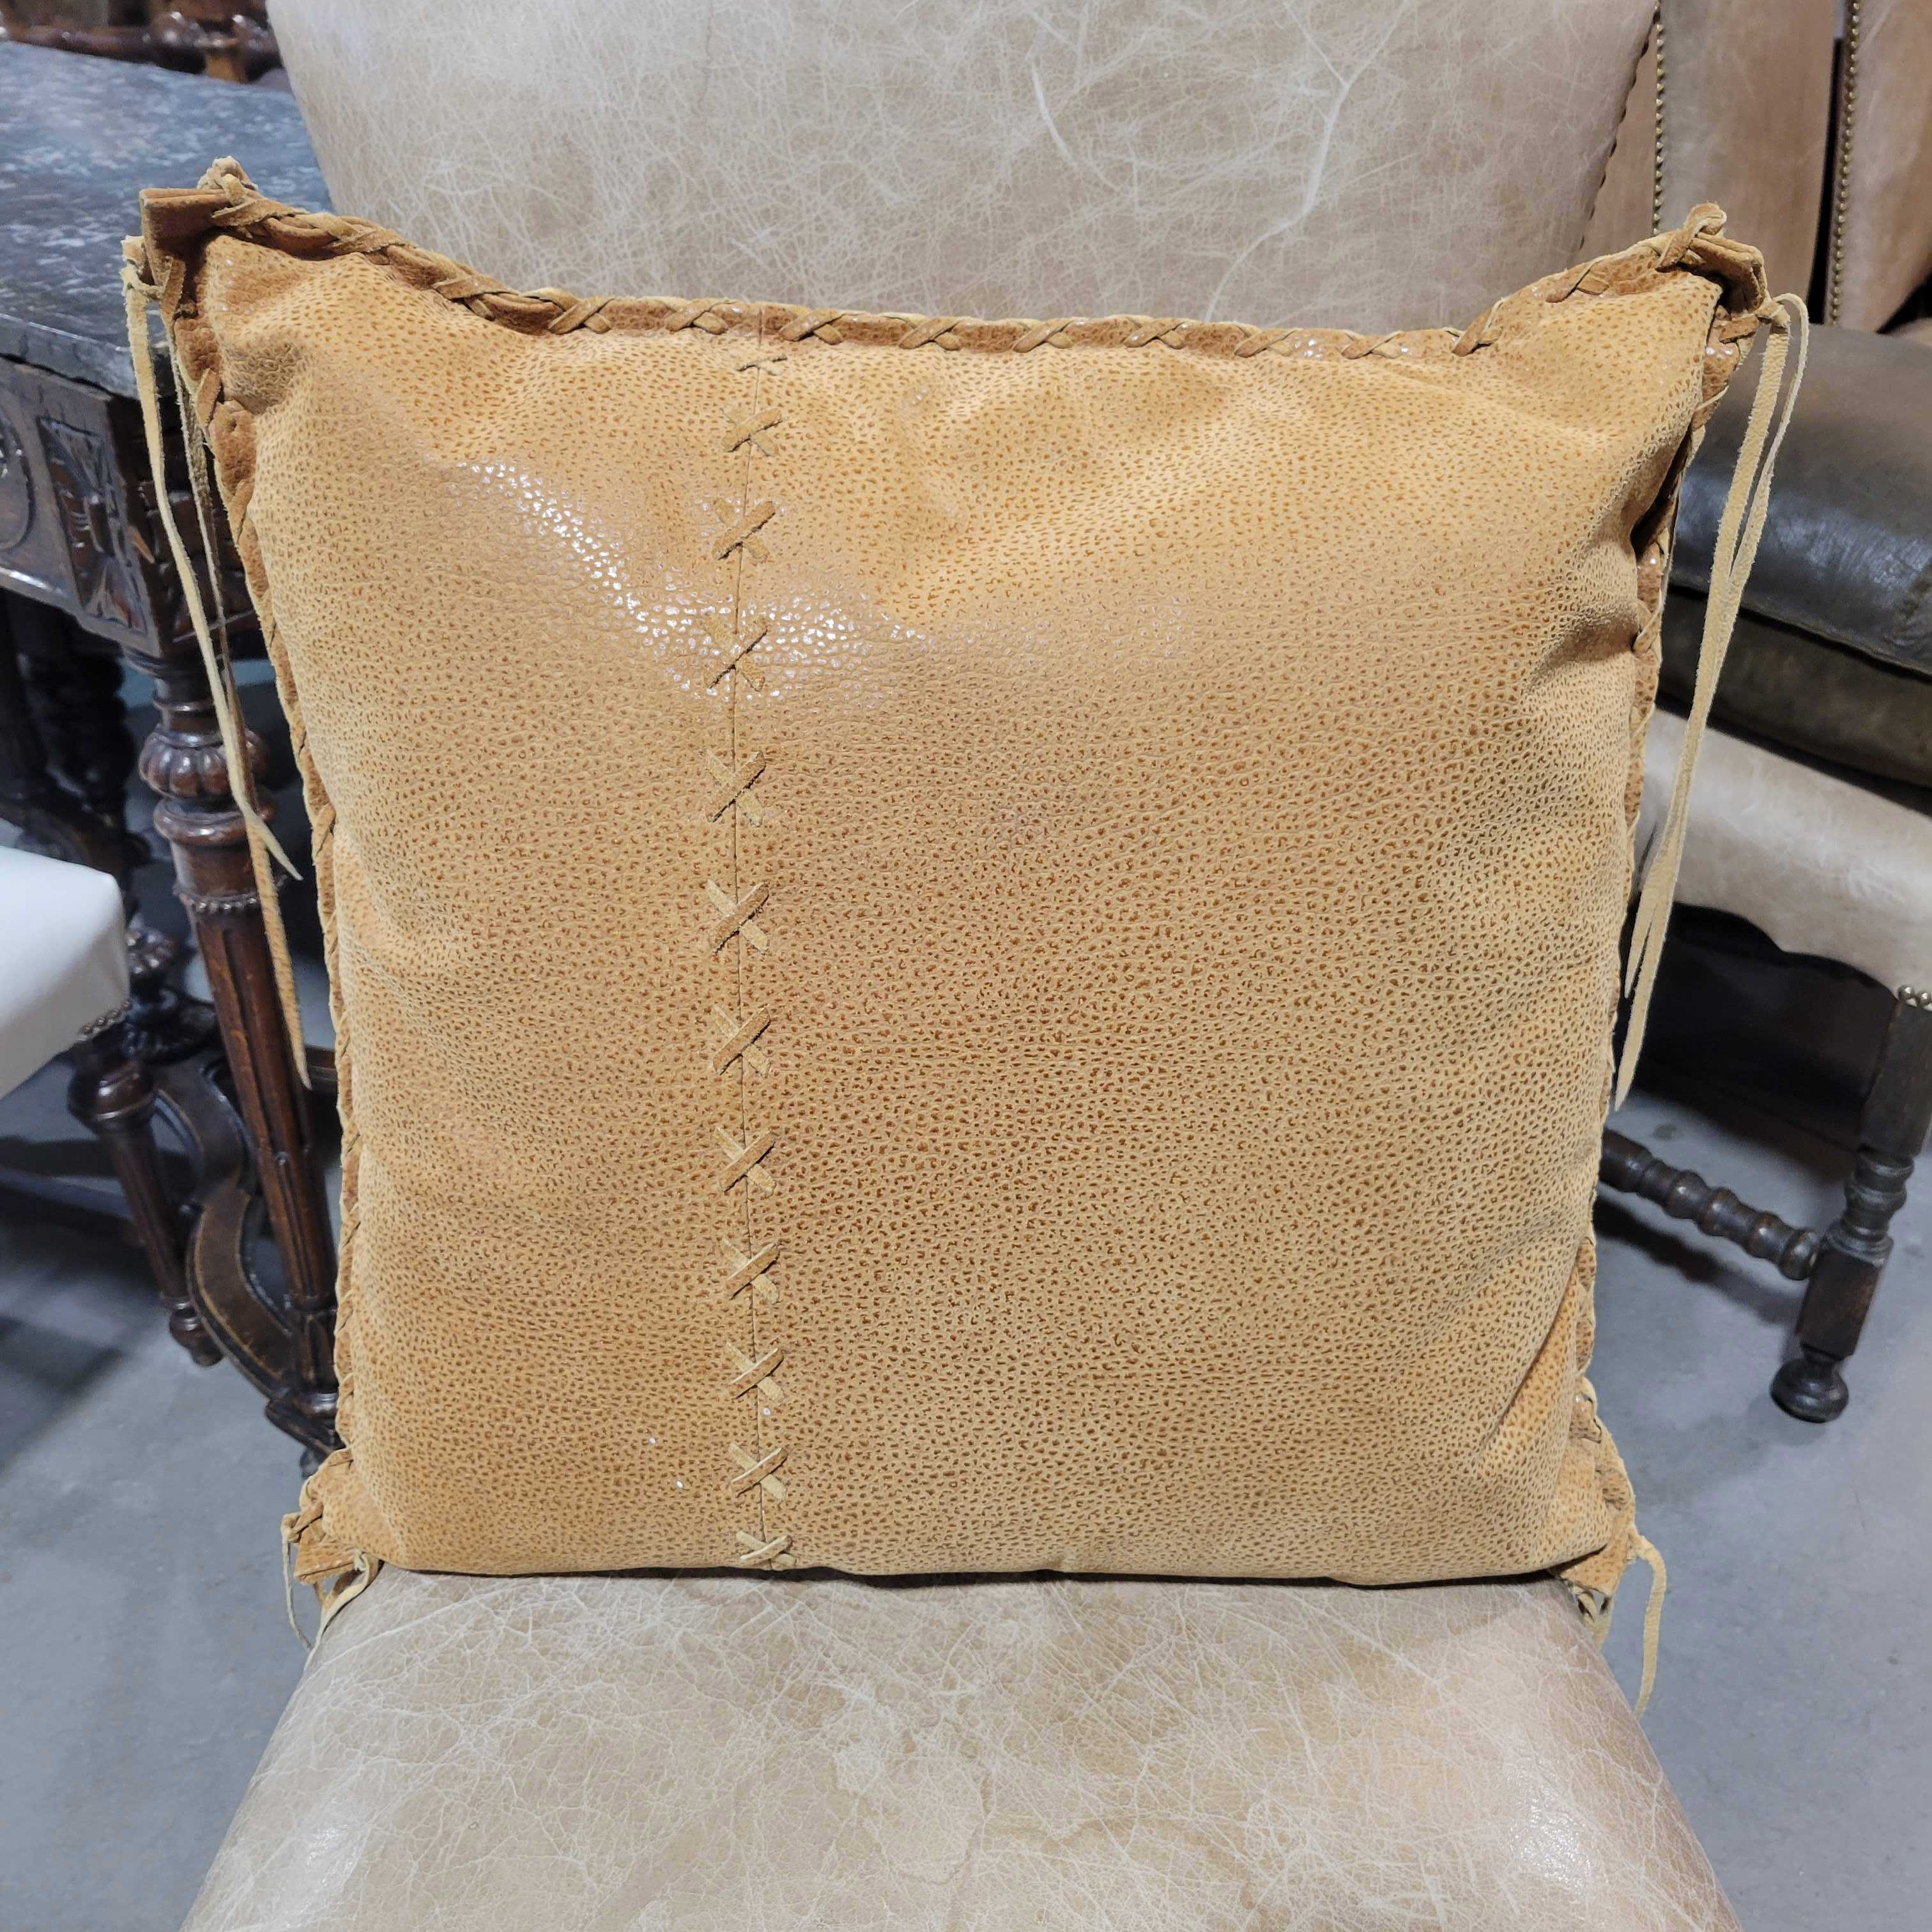 Golden Tan Suede Leather & Stitching Accent Pillow